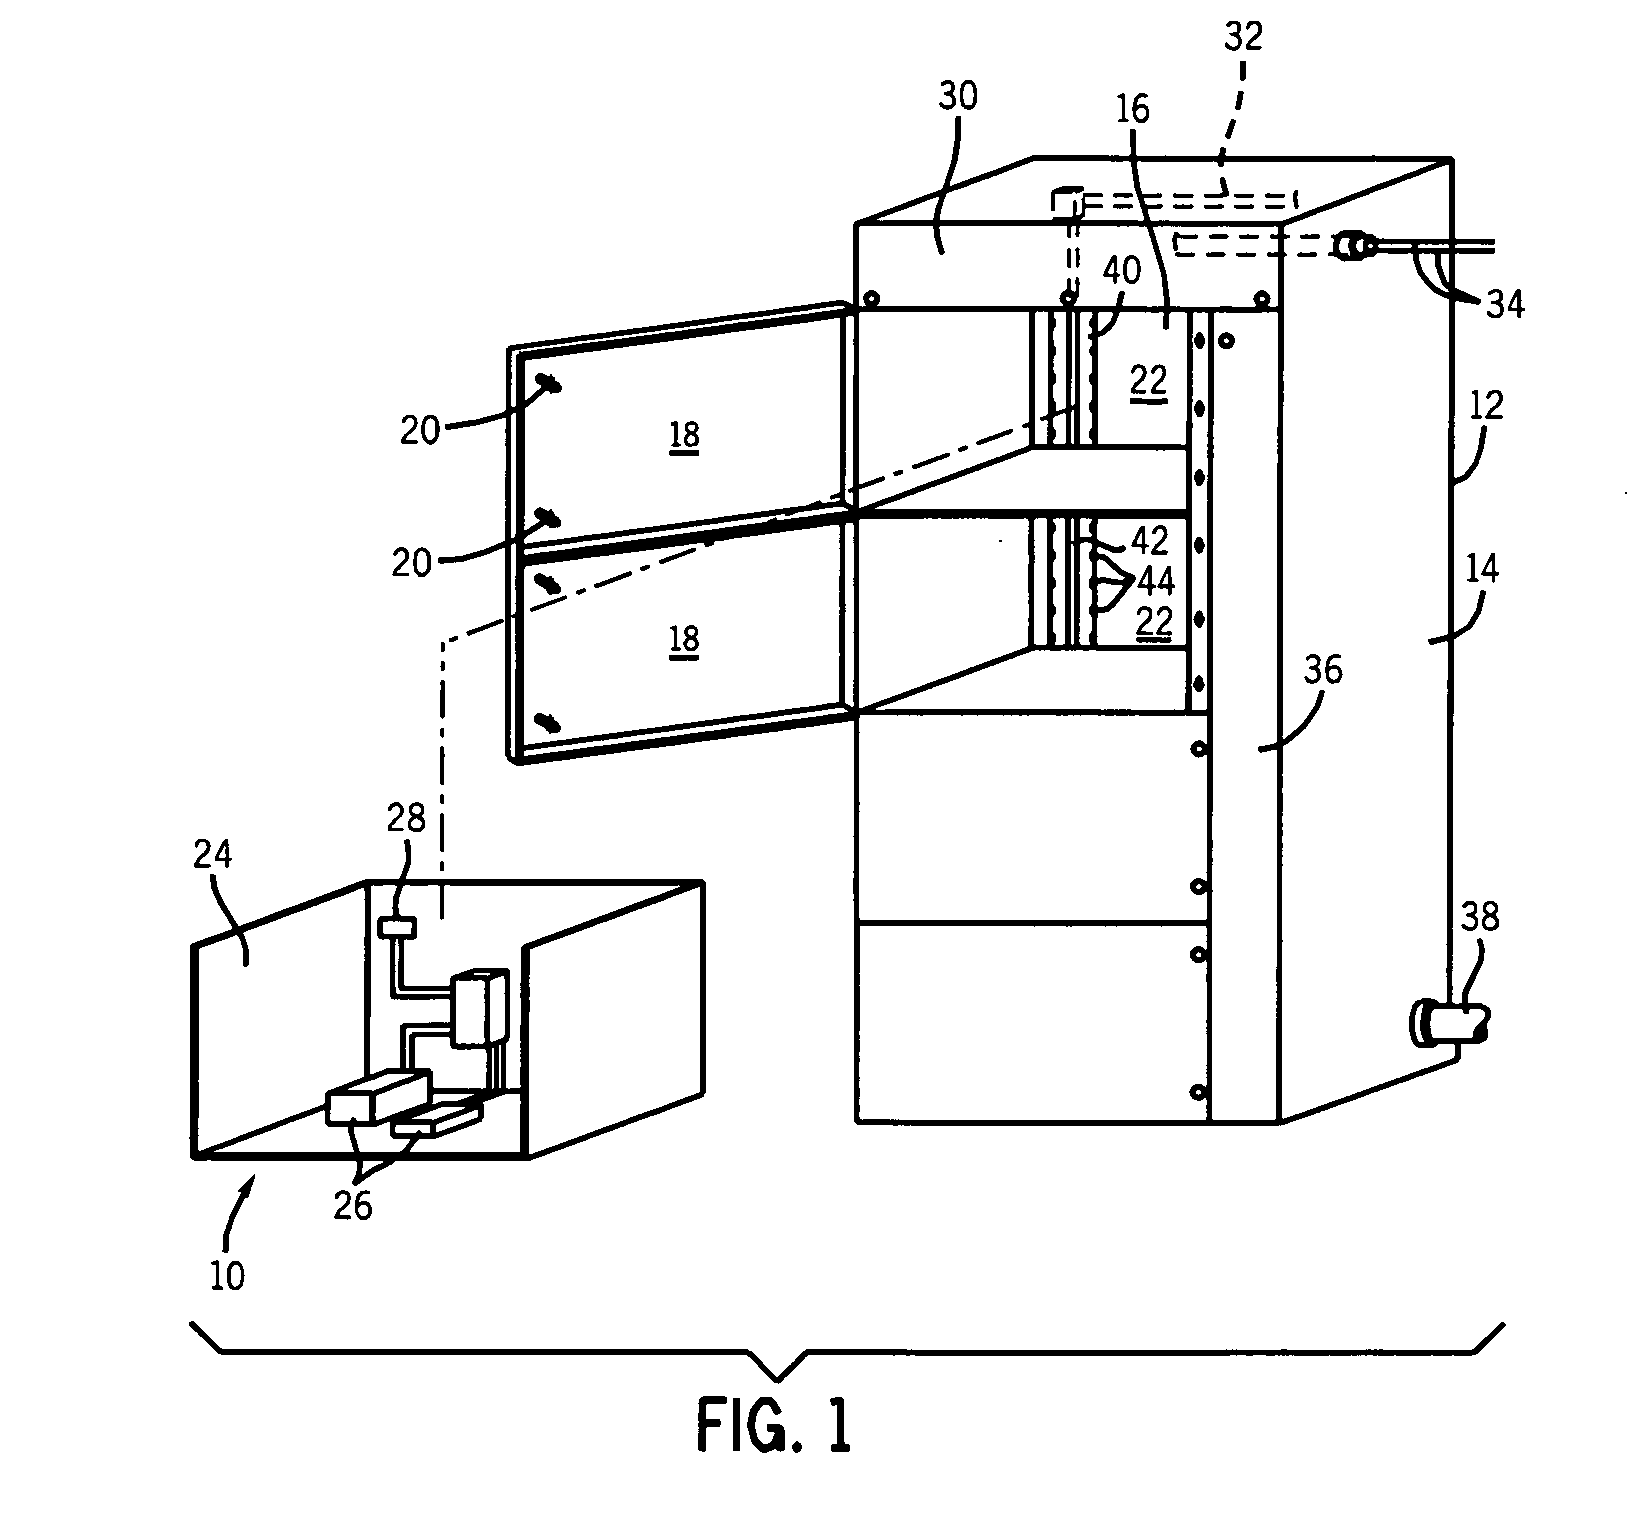 Electrical system having withdrawable unit with maintained control and communication connection